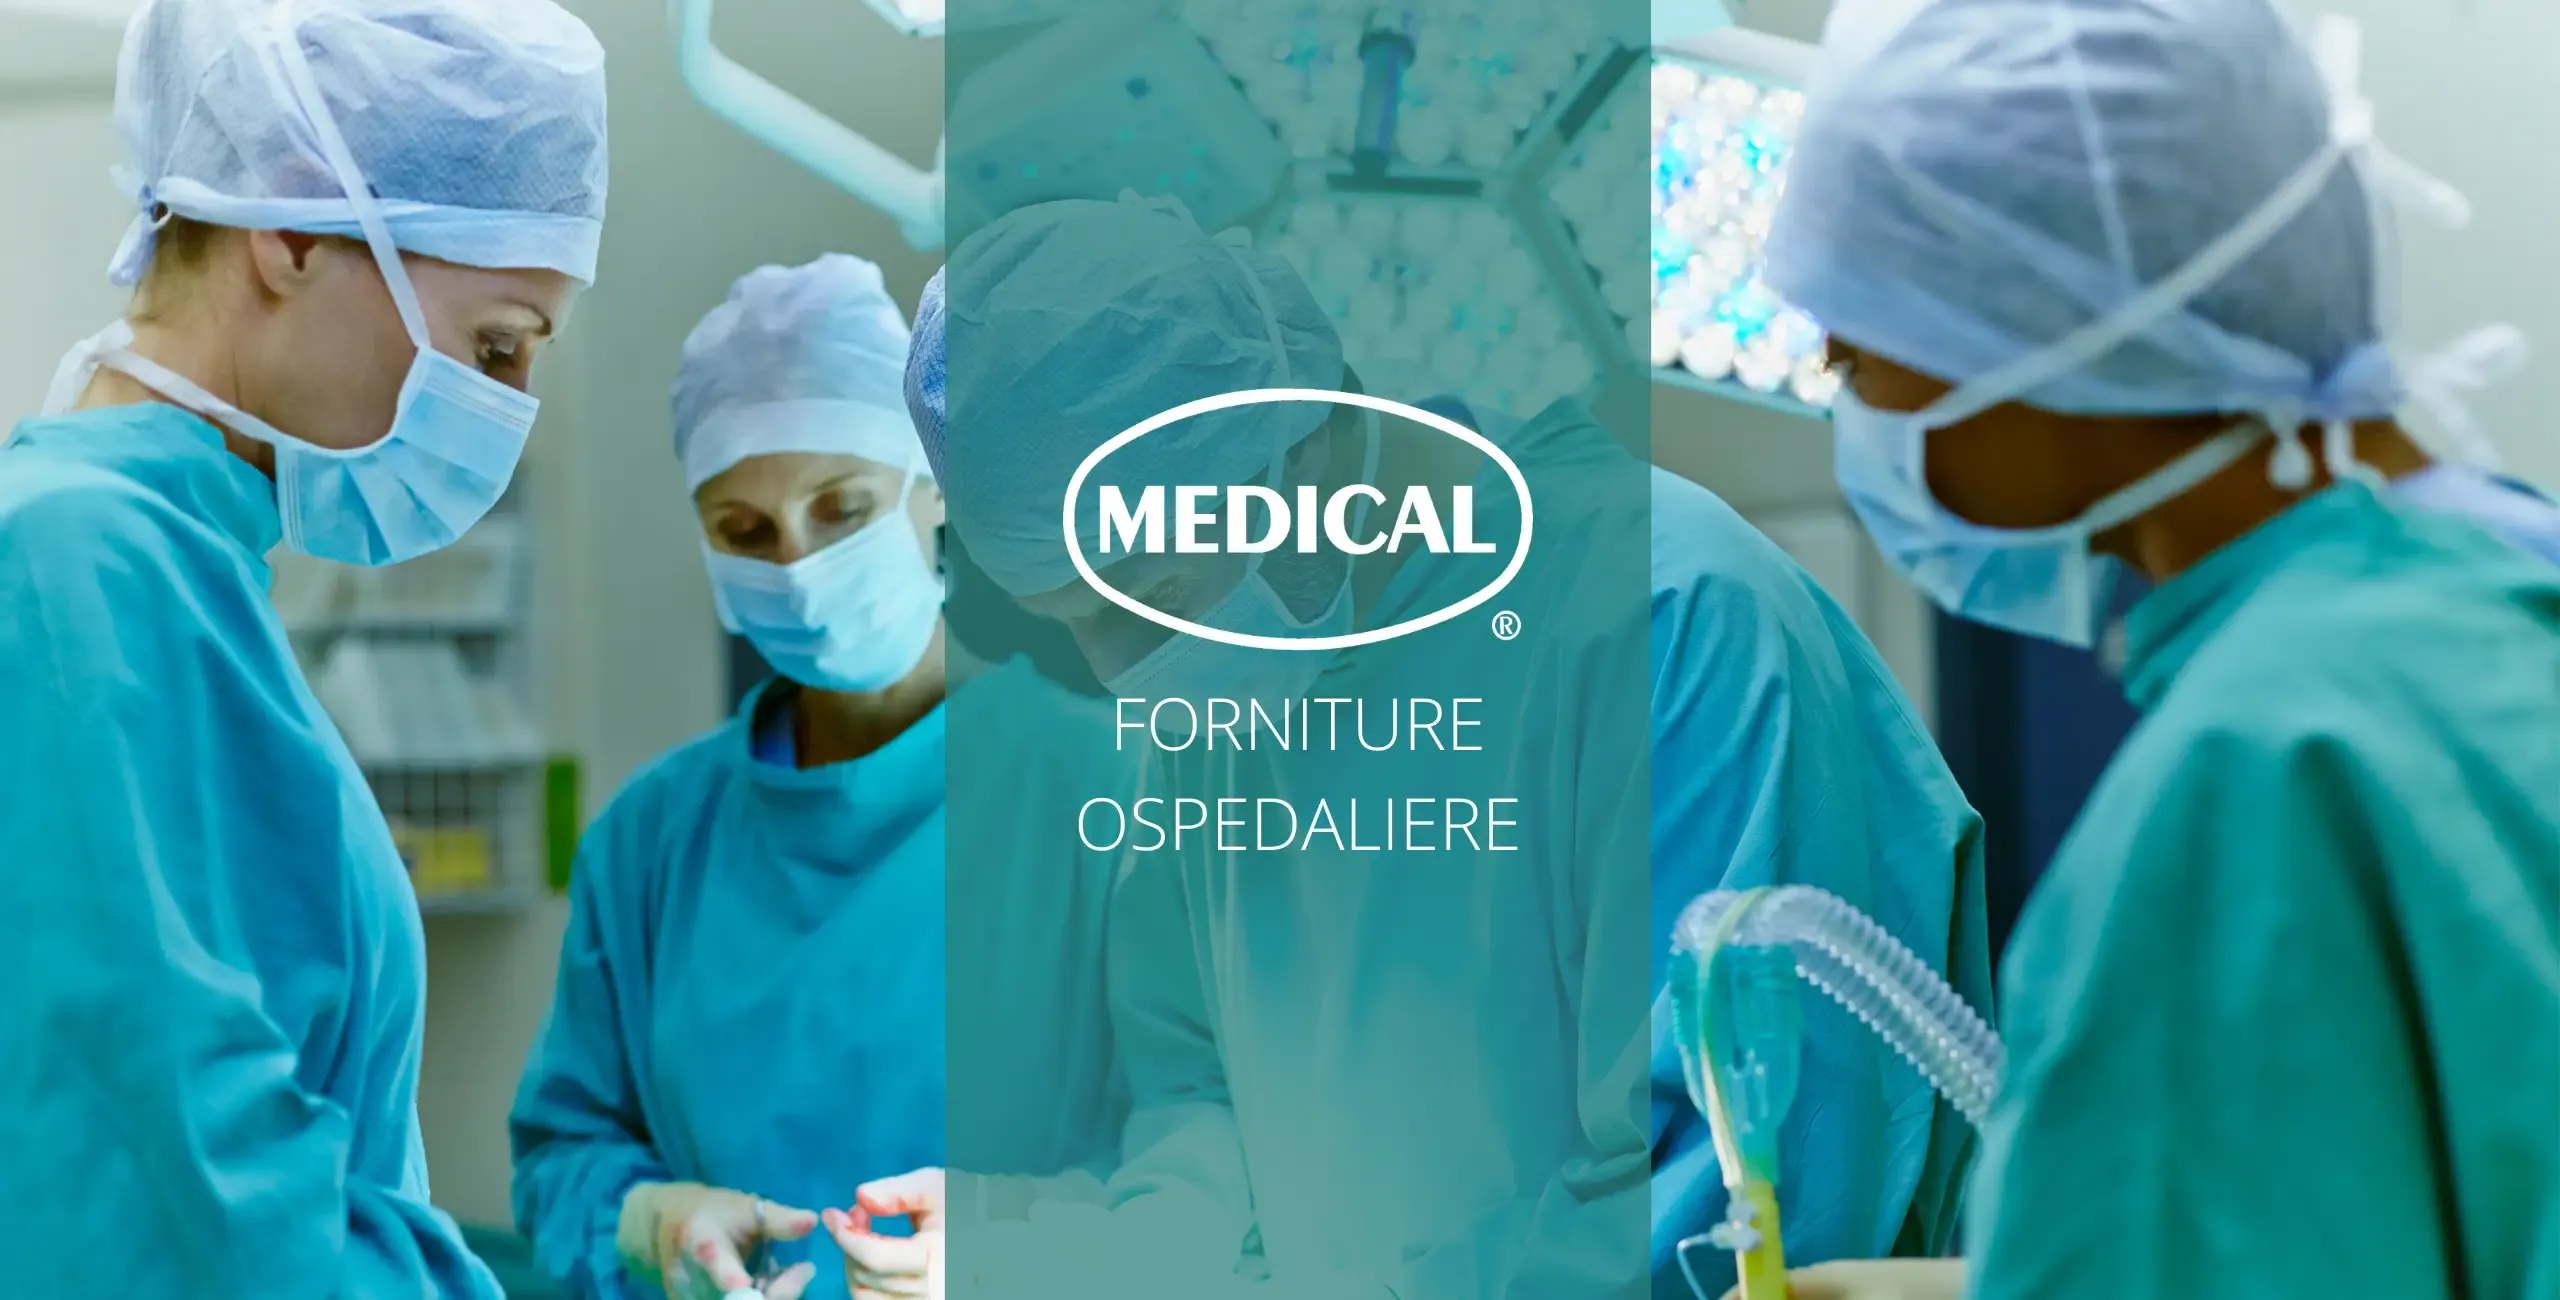 Medical Forniture Ospedaliere